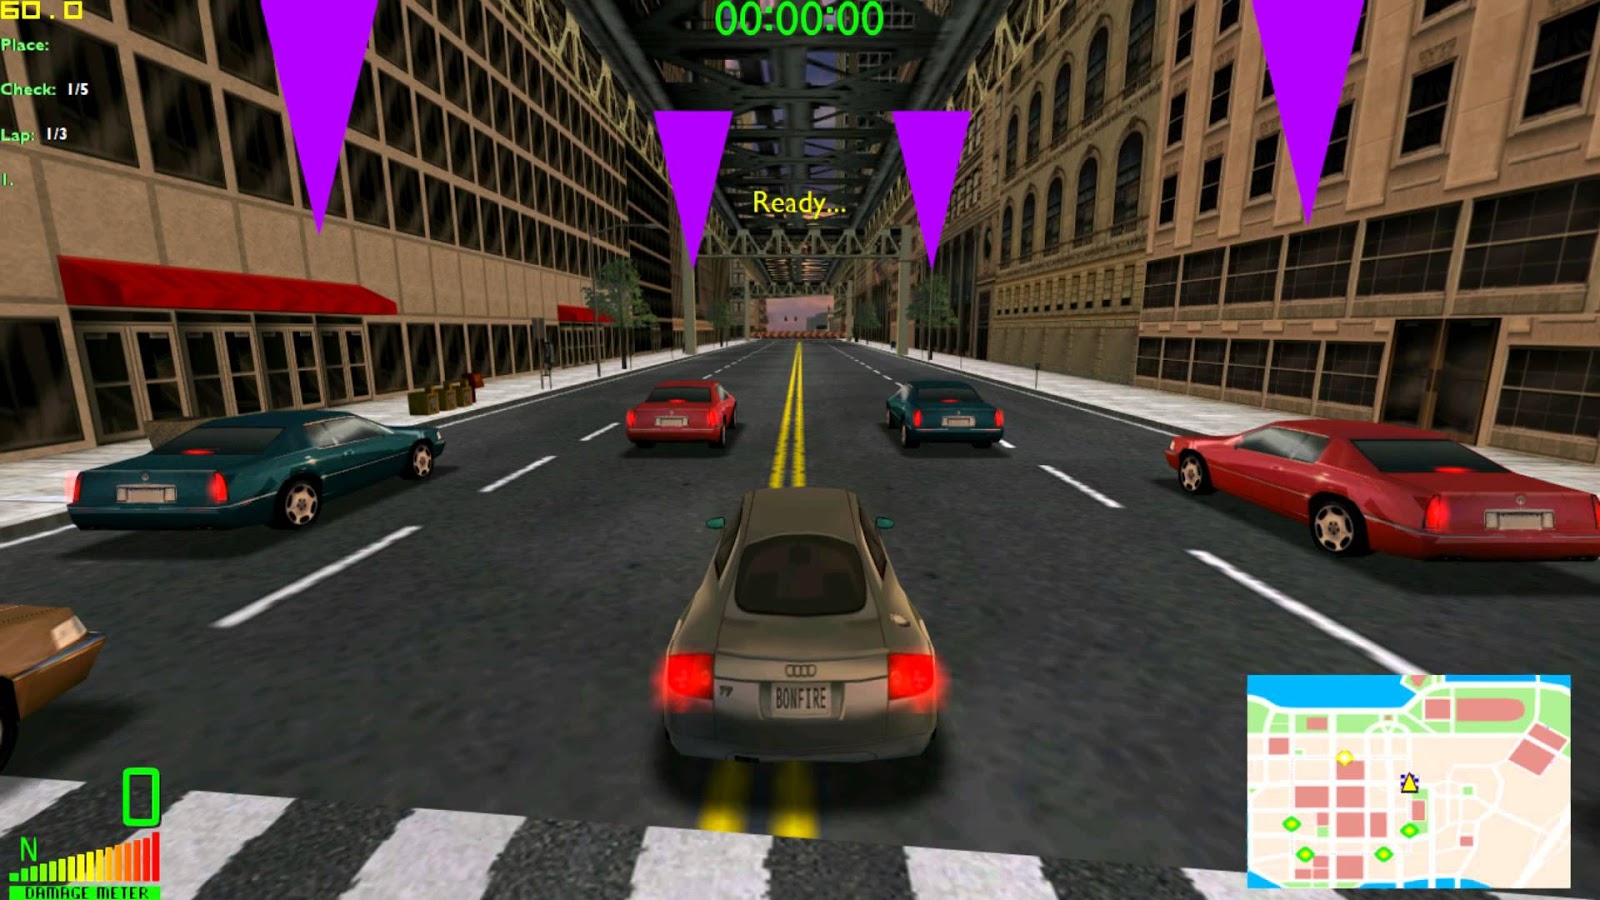 MIDTOWN MADNESS 2 Free Full Version Games Download For PC